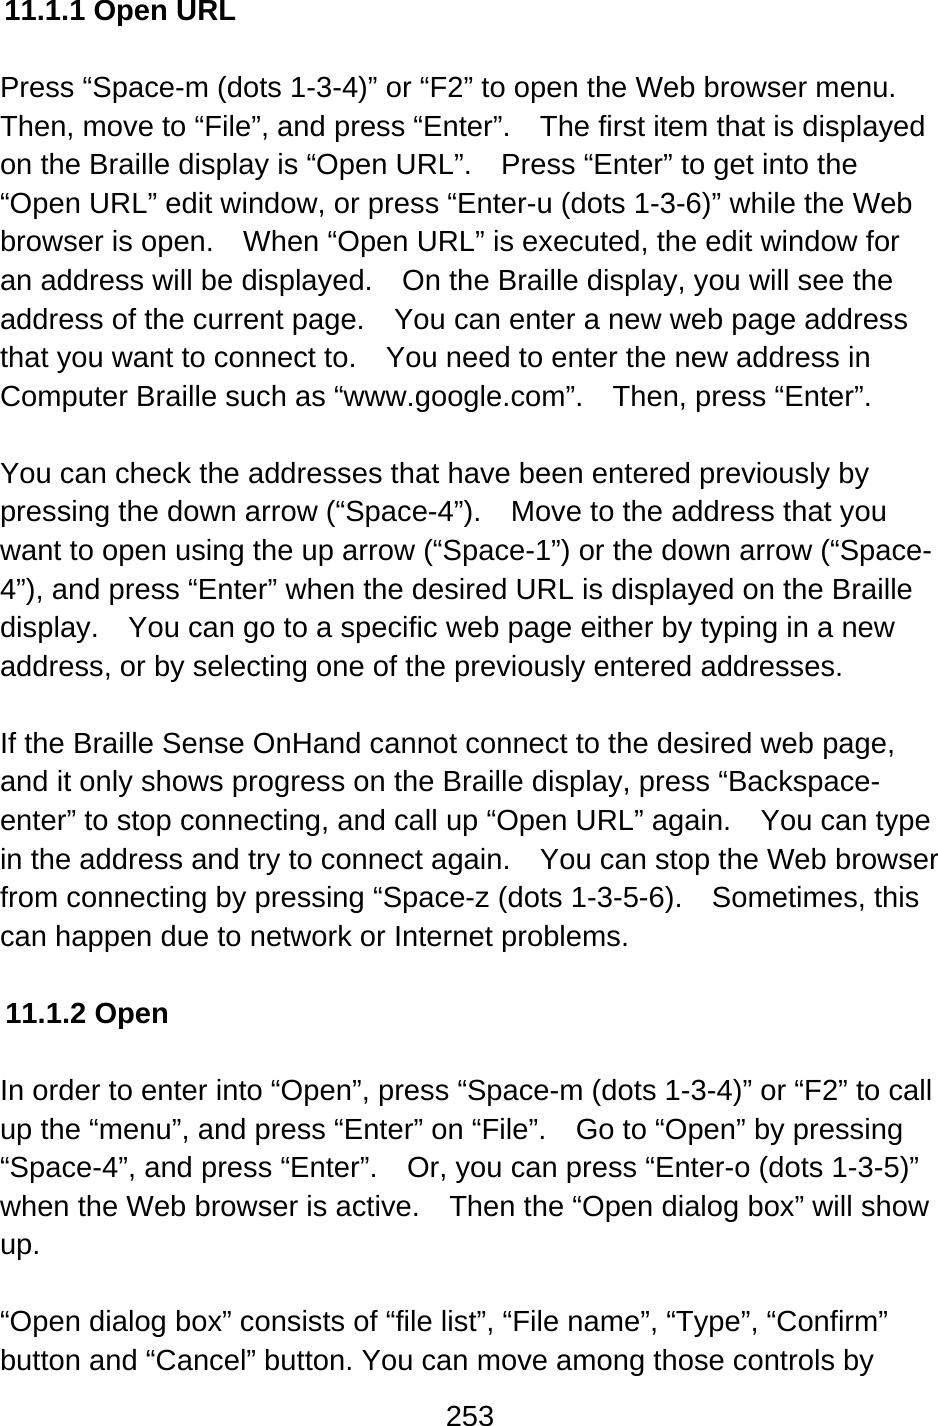 253  11.1.1 Open URL  Press “Space-m (dots 1-3-4)” or “F2” to open the Web browser menu.   Then, move to “File”, and press “Enter”.    The first item that is displayed on the Braille display is “Open URL”.    Press “Enter” to get into the “Open URL” edit window, or press “Enter-u (dots 1-3-6)” while the Web browser is open.    When “Open URL” is executed, the edit window for an address will be displayed.    On the Braille display, you will see the address of the current page.    You can enter a new web page address that you want to connect to.    You need to enter the new address in Computer Braille such as “www.google.com”.    Then, press “Enter”.  You can check the addresses that have been entered previously by pressing the down arrow (“Space-4”).    Move to the address that you want to open using the up arrow (“Space-1”) or the down arrow (“Space-4”), and press “Enter” when the desired URL is displayed on the Braille display.    You can go to a specific web page either by typing in a new address, or by selecting one of the previously entered addresses.  If the Braille Sense OnHand cannot connect to the desired web page, and it only shows progress on the Braille display, press “Backspace-enter” to stop connecting, and call up “Open URL” again.    You can type in the address and try to connect again.    You can stop the Web browser from connecting by pressing “Space-z (dots 1-3-5-6).    Sometimes, this can happen due to network or Internet problems.  11.1.2 Open  In order to enter into “Open”, press “Space-m (dots 1-3-4)” or “F2” to call up the “menu”, and press “Enter” on “File”.    Go to “Open” by pressing “Space-4”, and press “Enter”.    Or, you can press “Enter-o (dots 1-3-5)” when the Web browser is active.    Then the “Open dialog box” will show up.  “Open dialog box” consists of “file list”, “File name”, “Type”, “Confirm” button and “Cancel” button. You can move among those controls by 